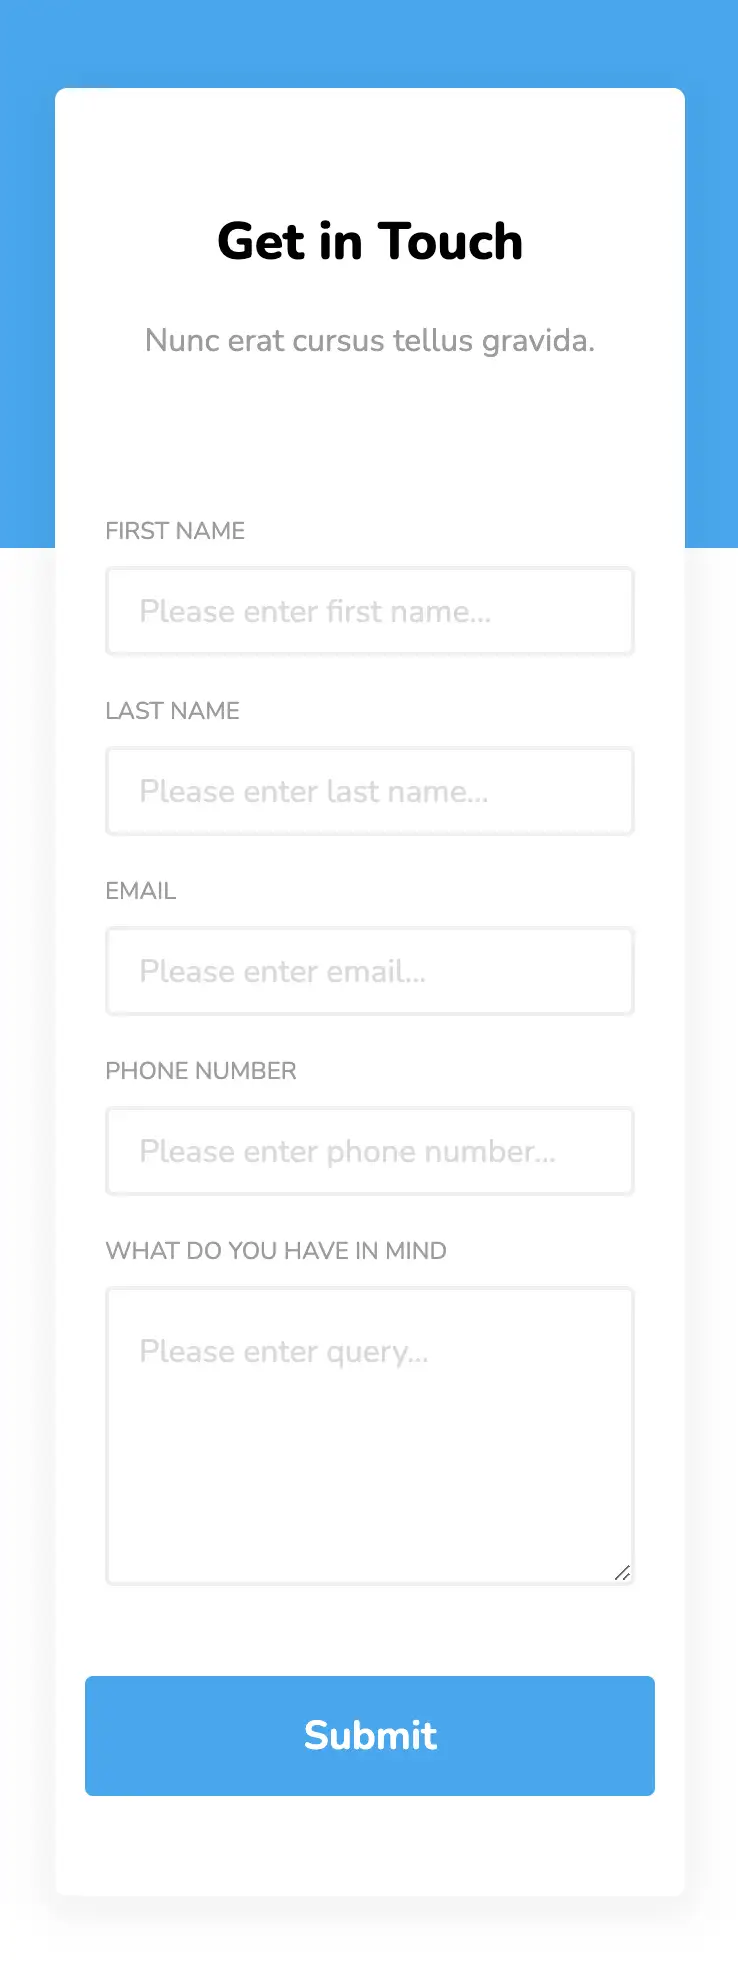 Contact designs for websites: Simple Contact Form Mobile